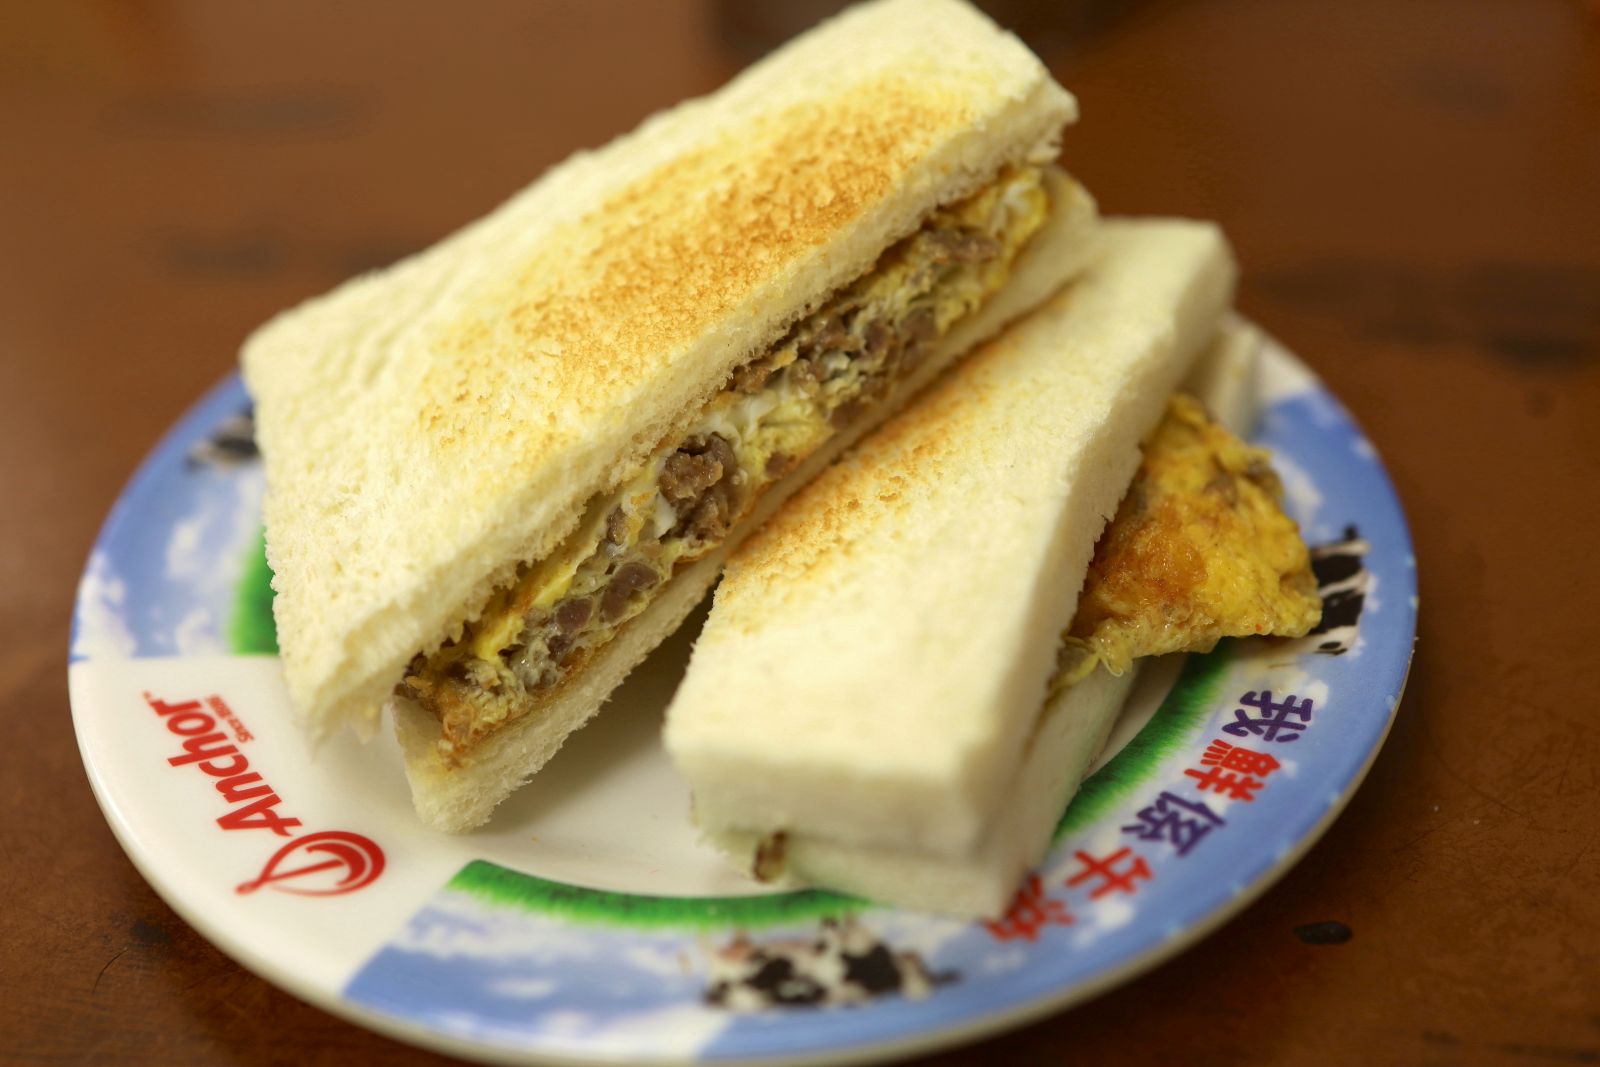 Savory beef sandwiched in crispy toasted bread (蛋牛治)